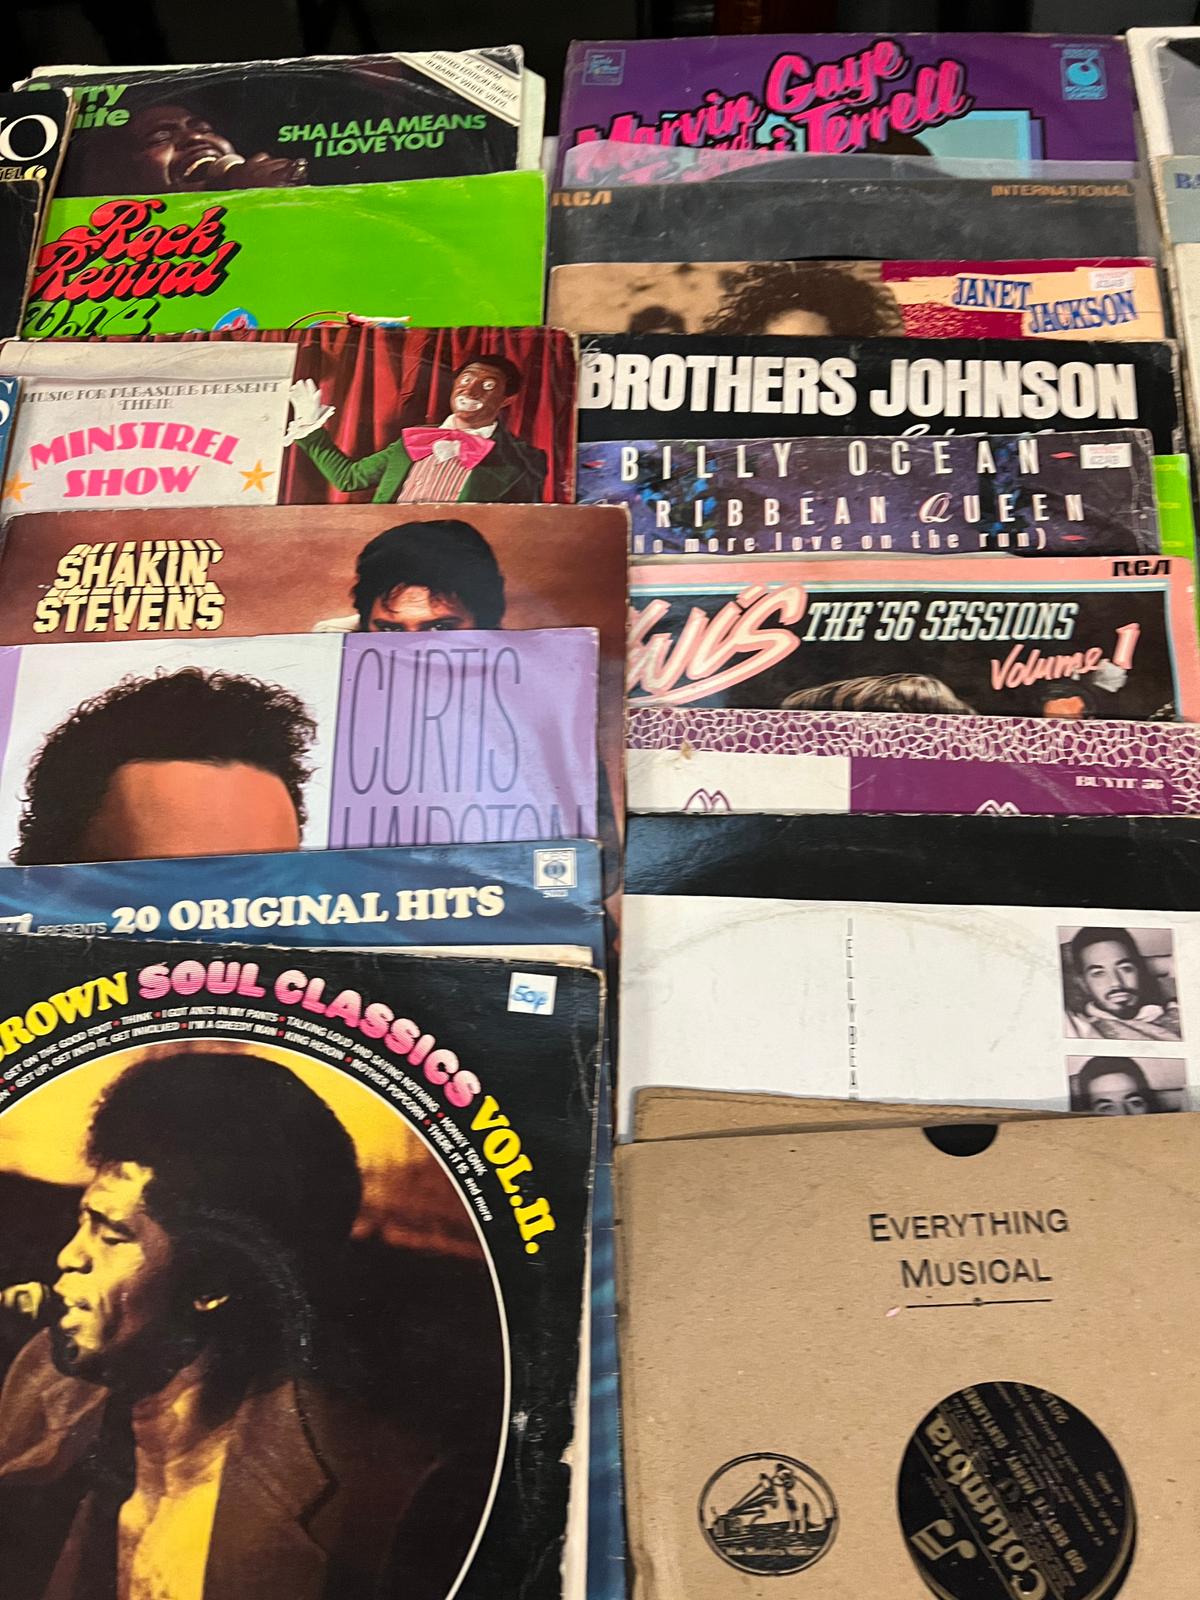 A selection of Lp's , various music approx 40 records - Image 3 of 4